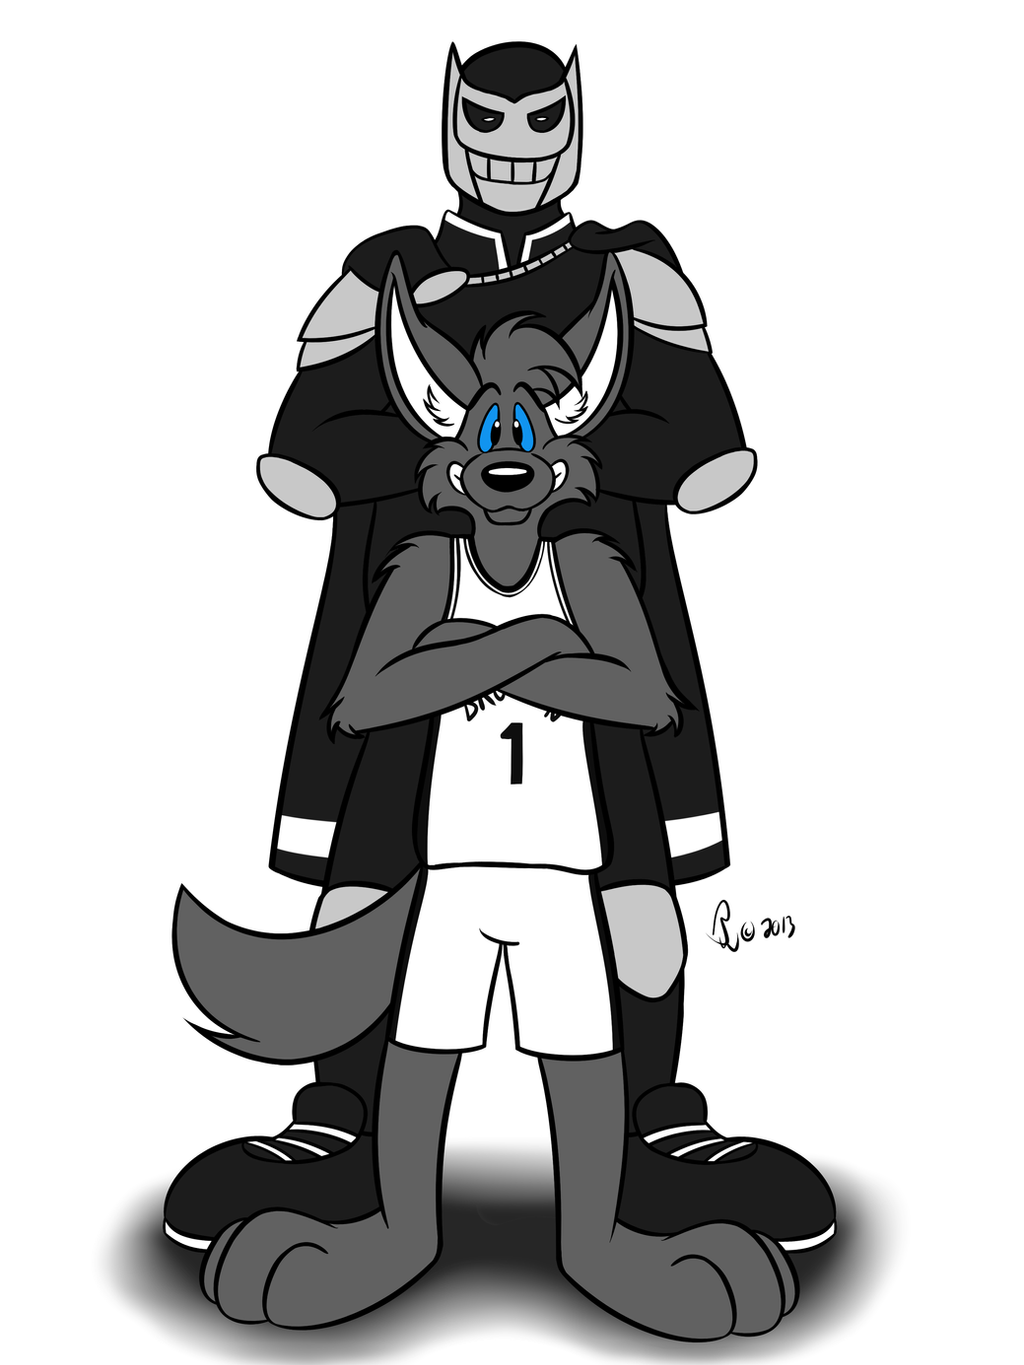 NBA Mascots - BrooklynKnight/Sly the Silver Fox by Bleuxwolf on DeviantArt